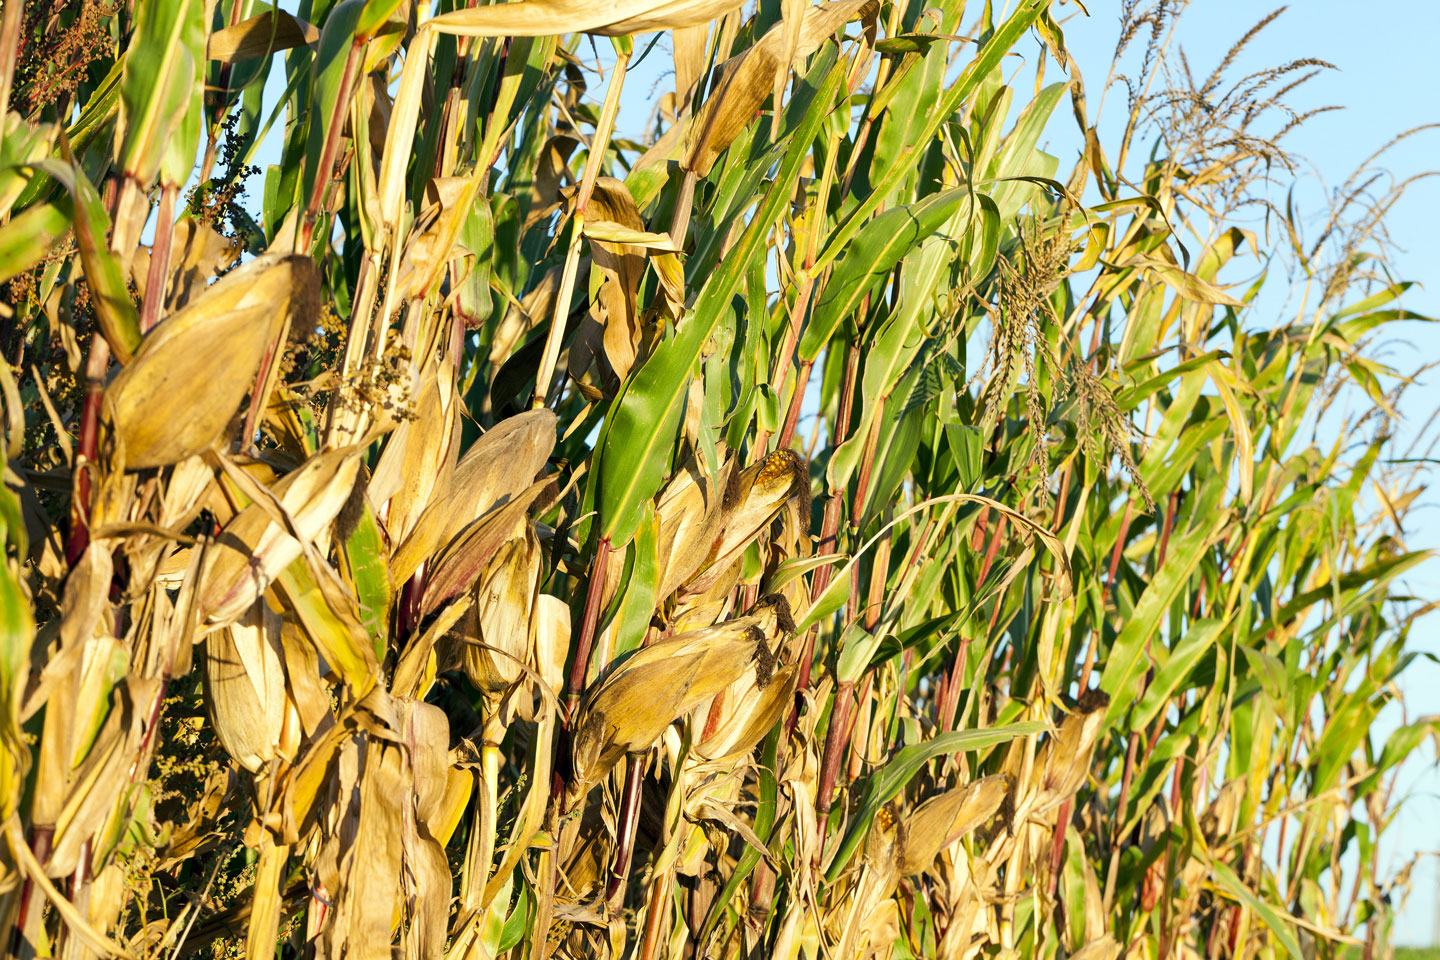 Aim EC herbicide is a harvest aid for corn, grain sorghum, soybeans and rice.